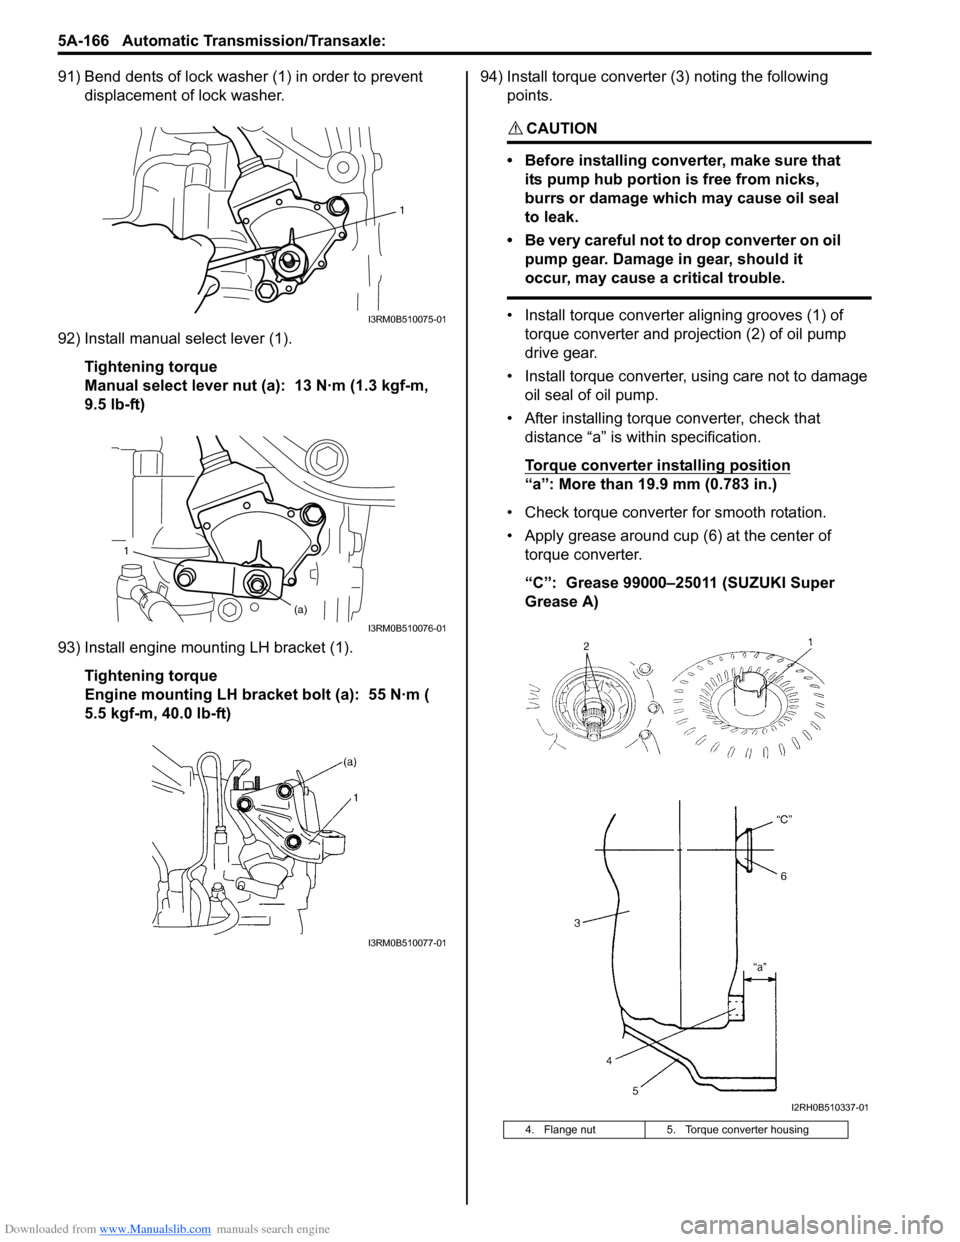 SUZUKI SWIFT 2007 2.G Service Workshop Manual Downloaded from www.Manualslib.com manuals search engine 5A-166 Automatic Transmission/Transaxle: 
91) Bend dents of lock washer (1) in order to prevent displacement of lock washer.
92) Install manual